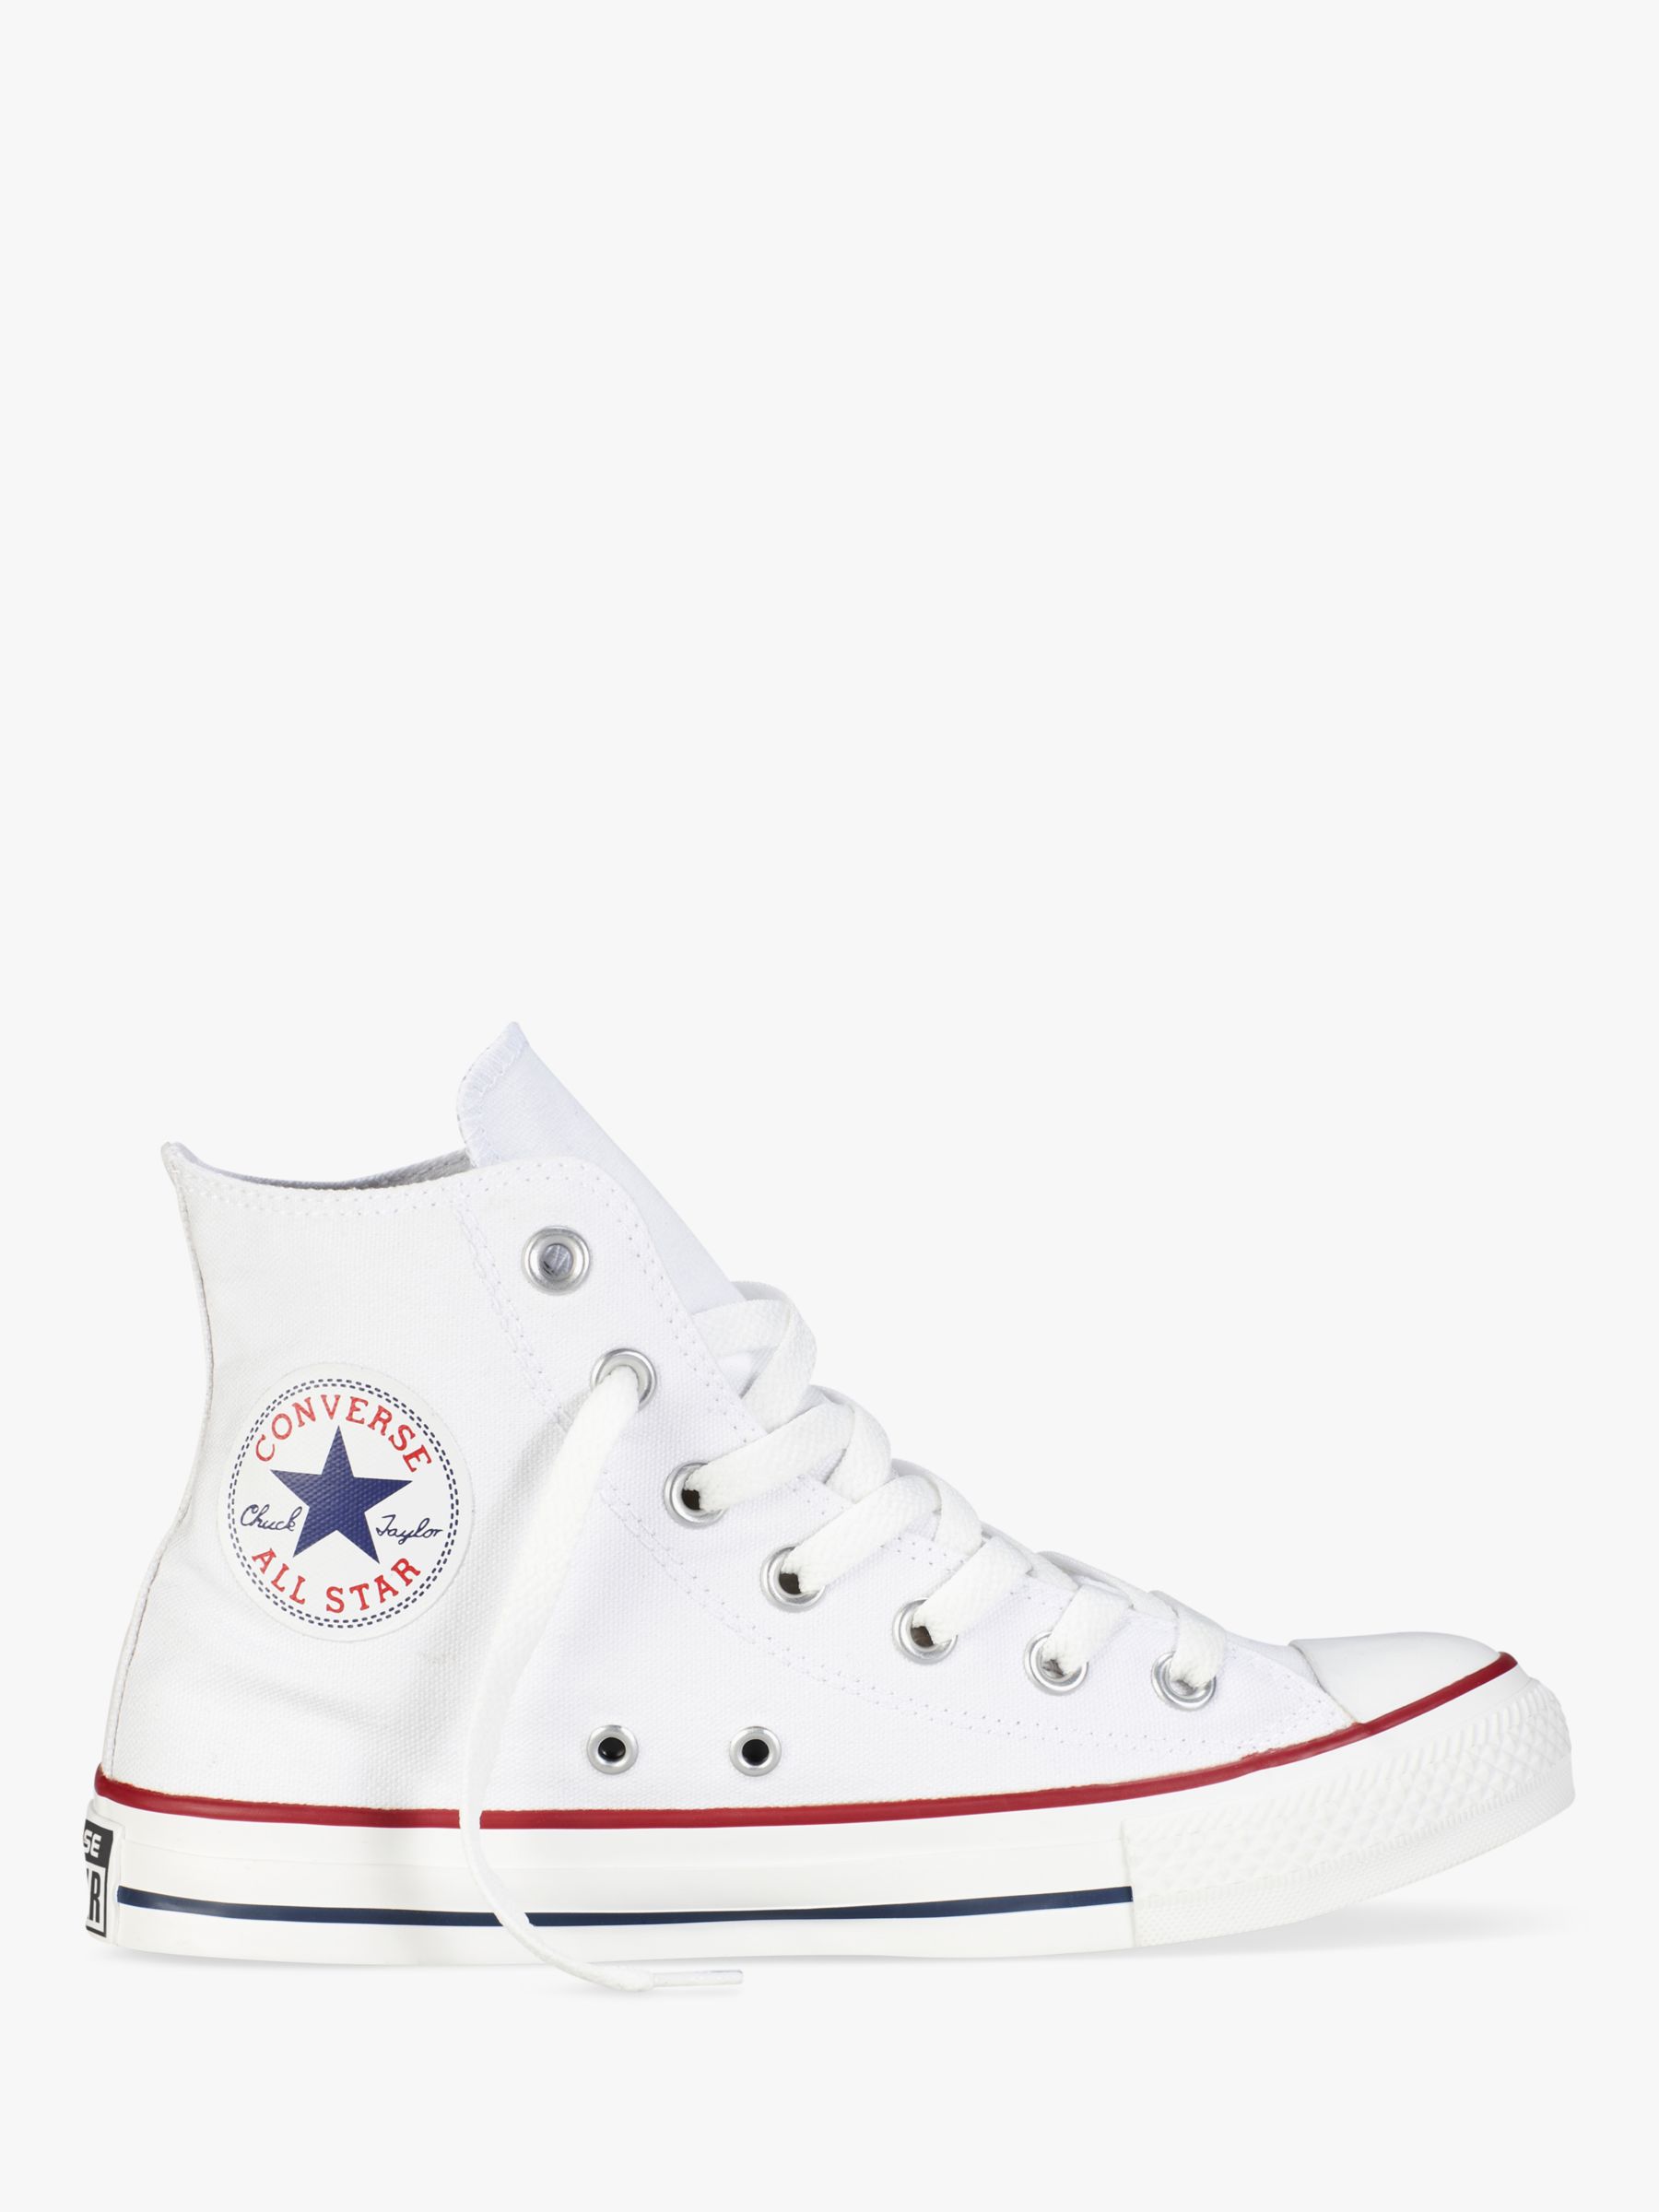 chuck taylor all star white high top